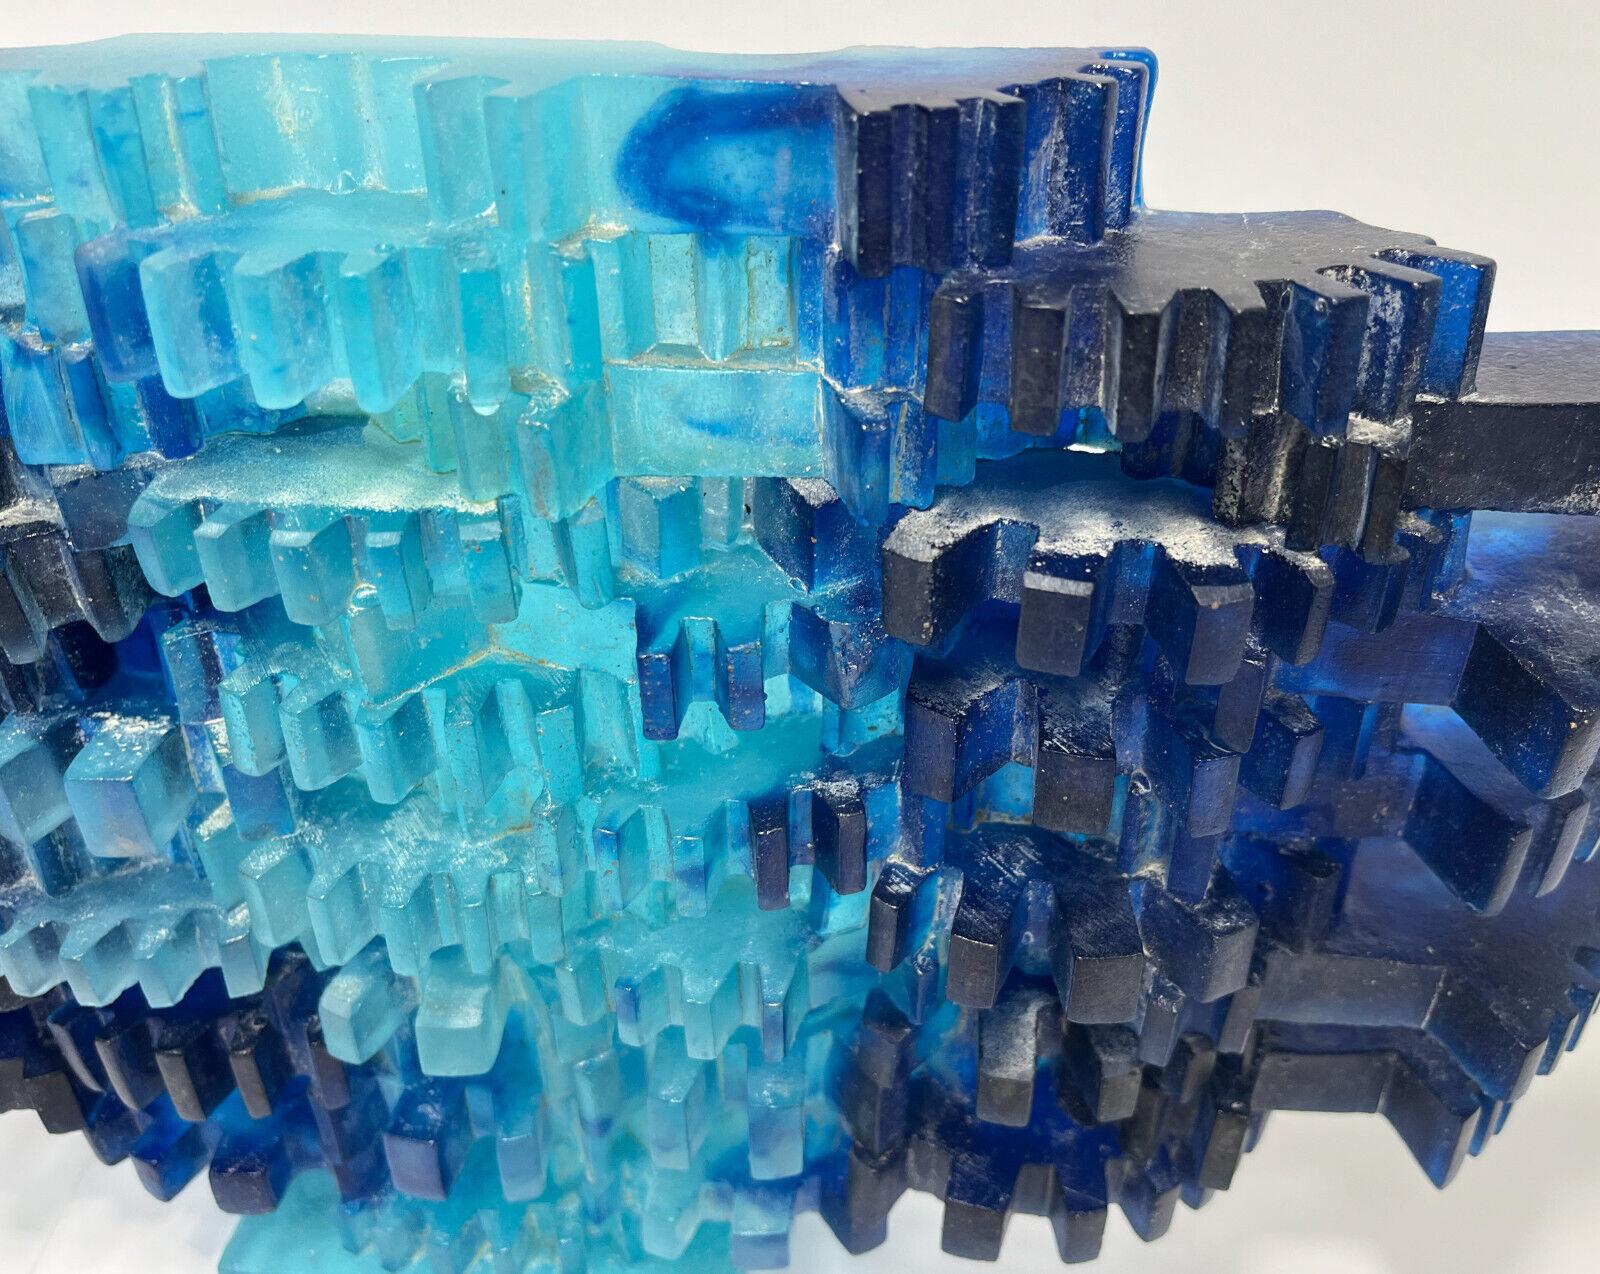 Daum Pate De Vere Abstract Sculpture by Mard De Rosny, Limited Edition of 200 For Sale 1